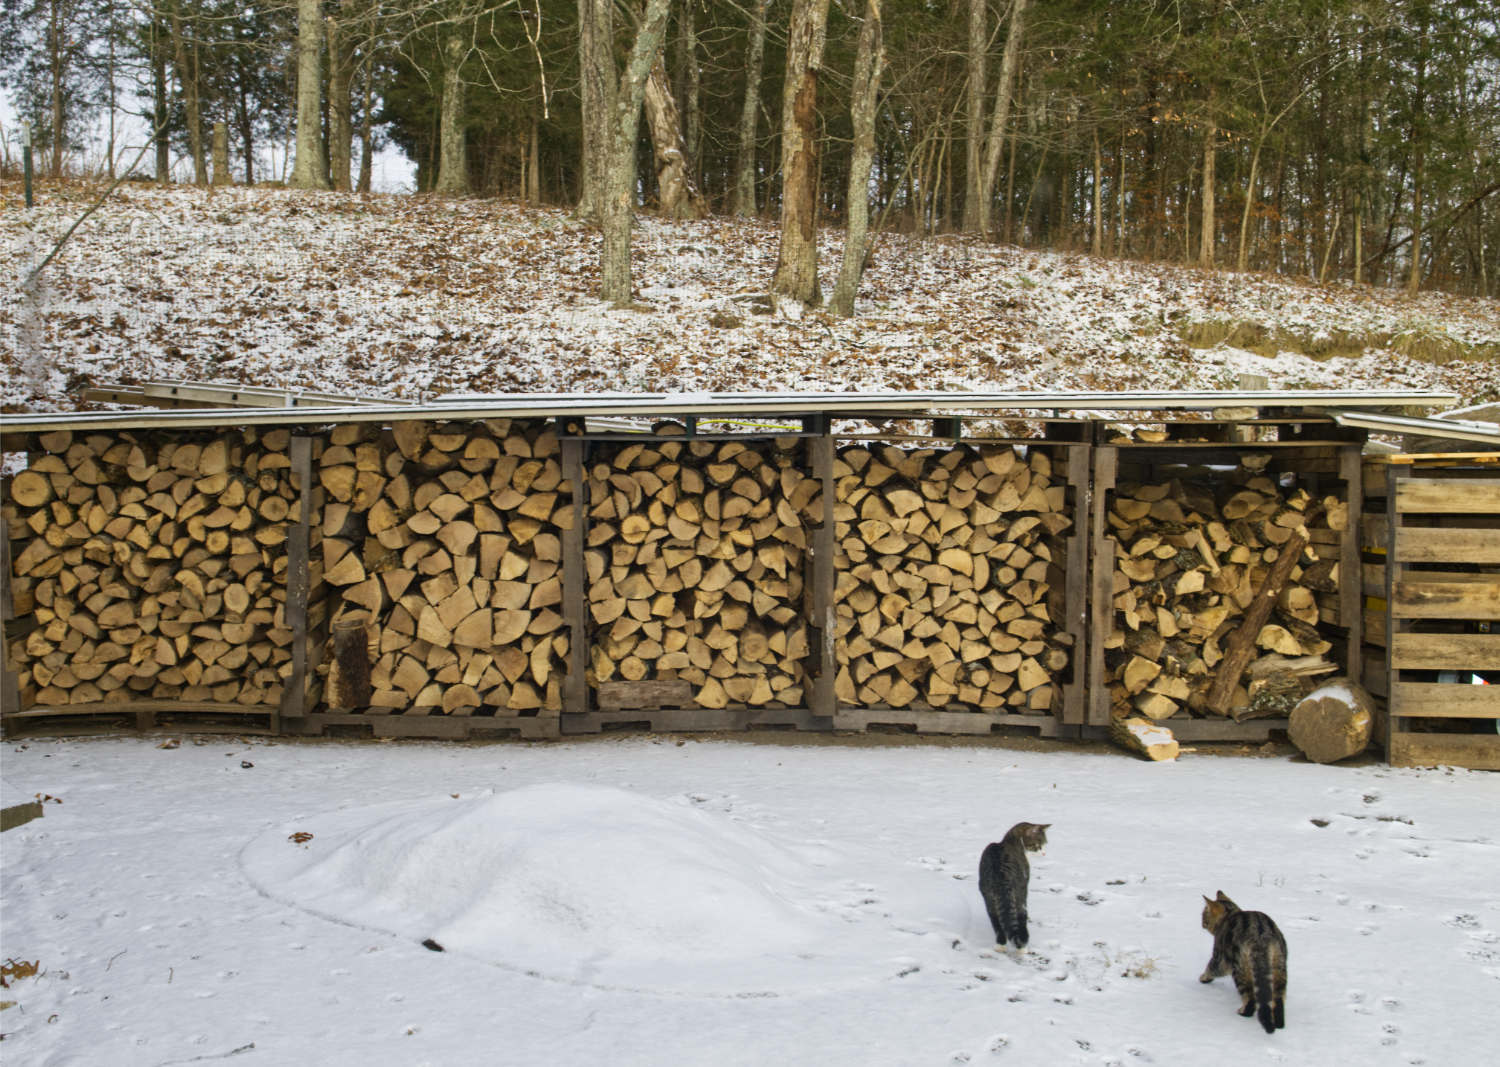 Image: firewood for winter